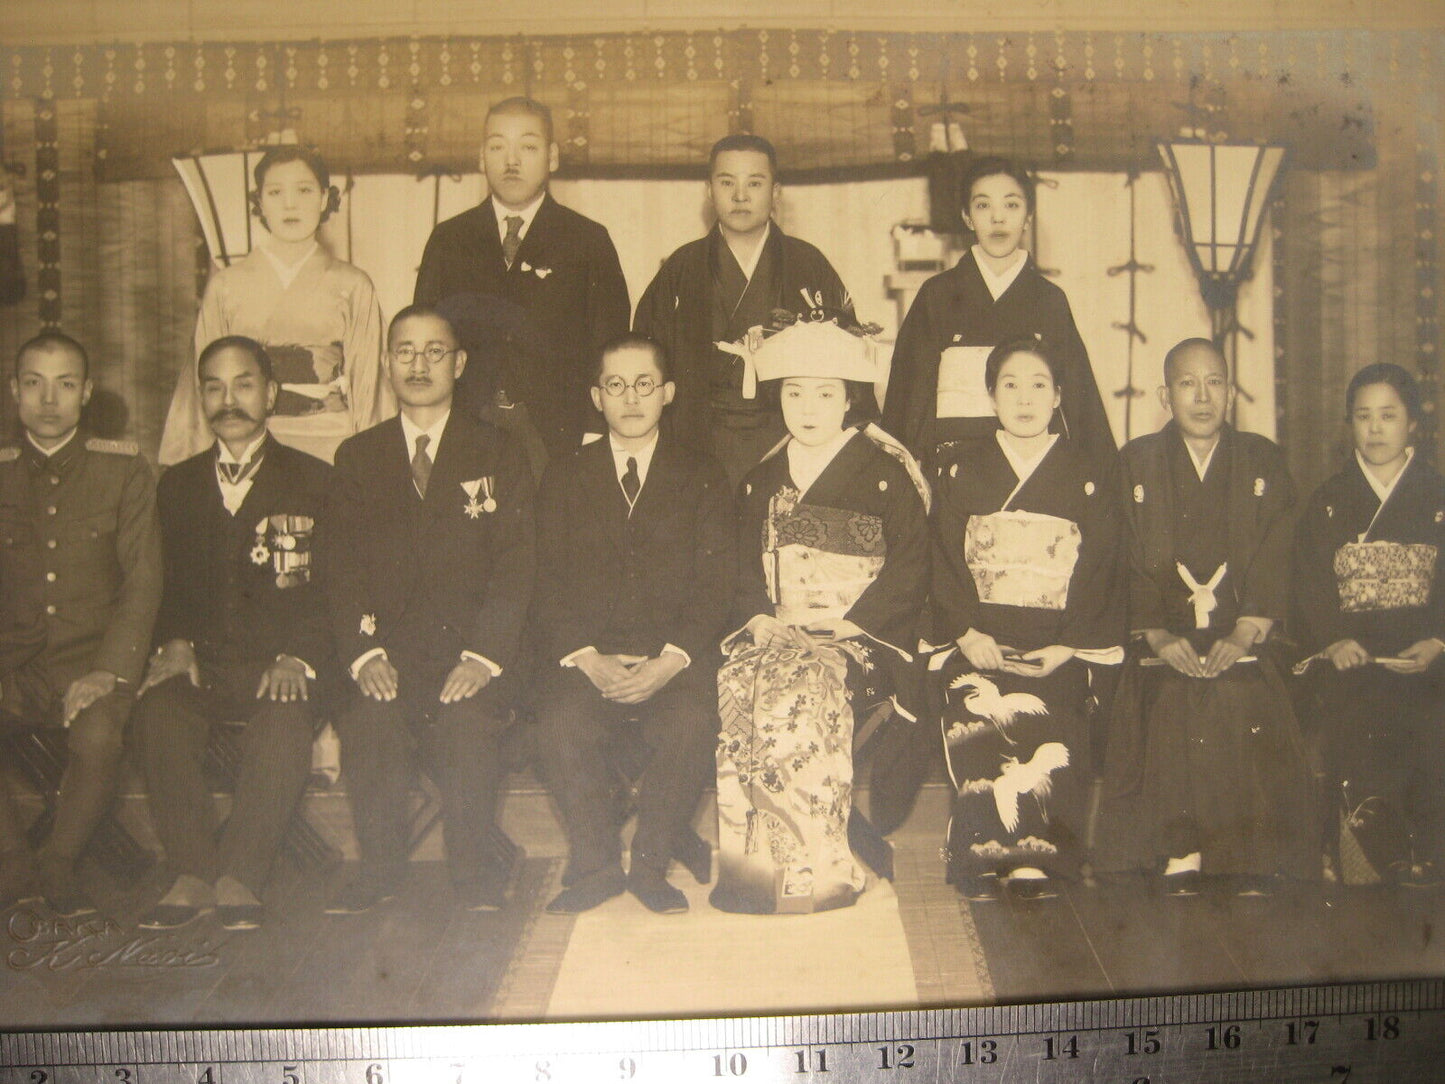 Japanese Antique Ww2 Wedding Photo 1938 (Showa 13Th Year) Imperial Military